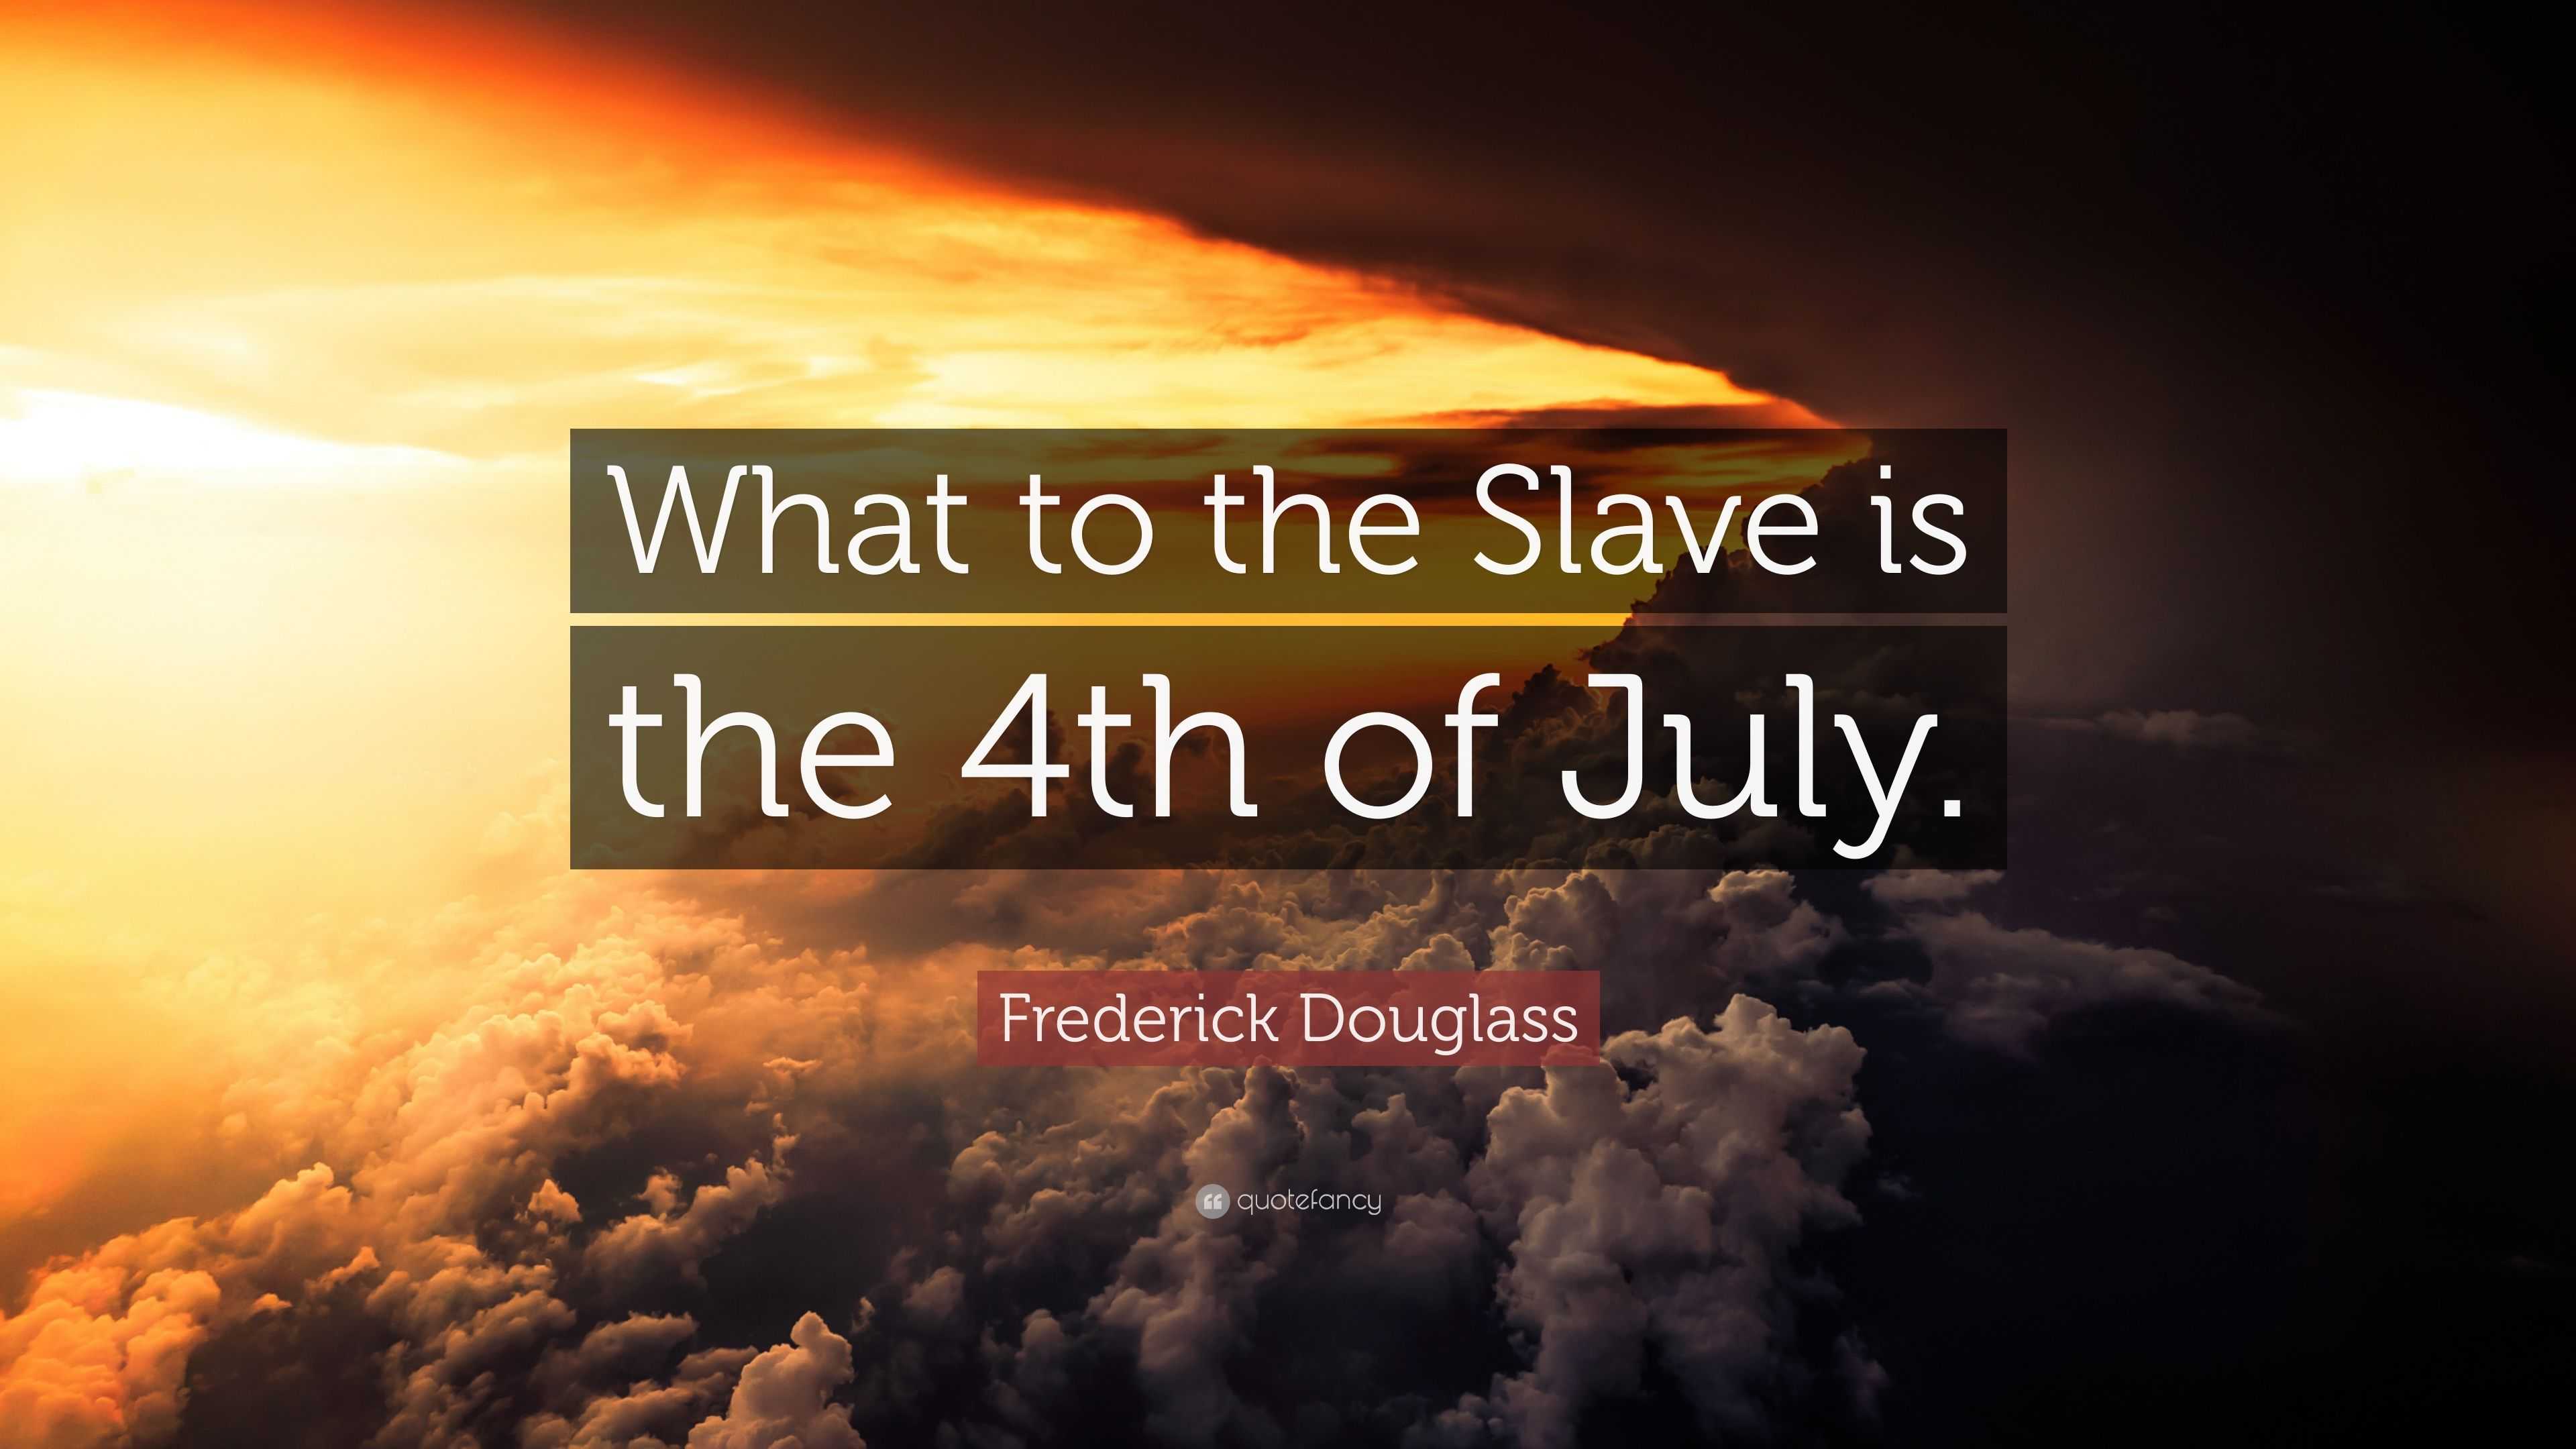 Frederick Douglass Quote “what To The Slave Is The 4th Of July” 